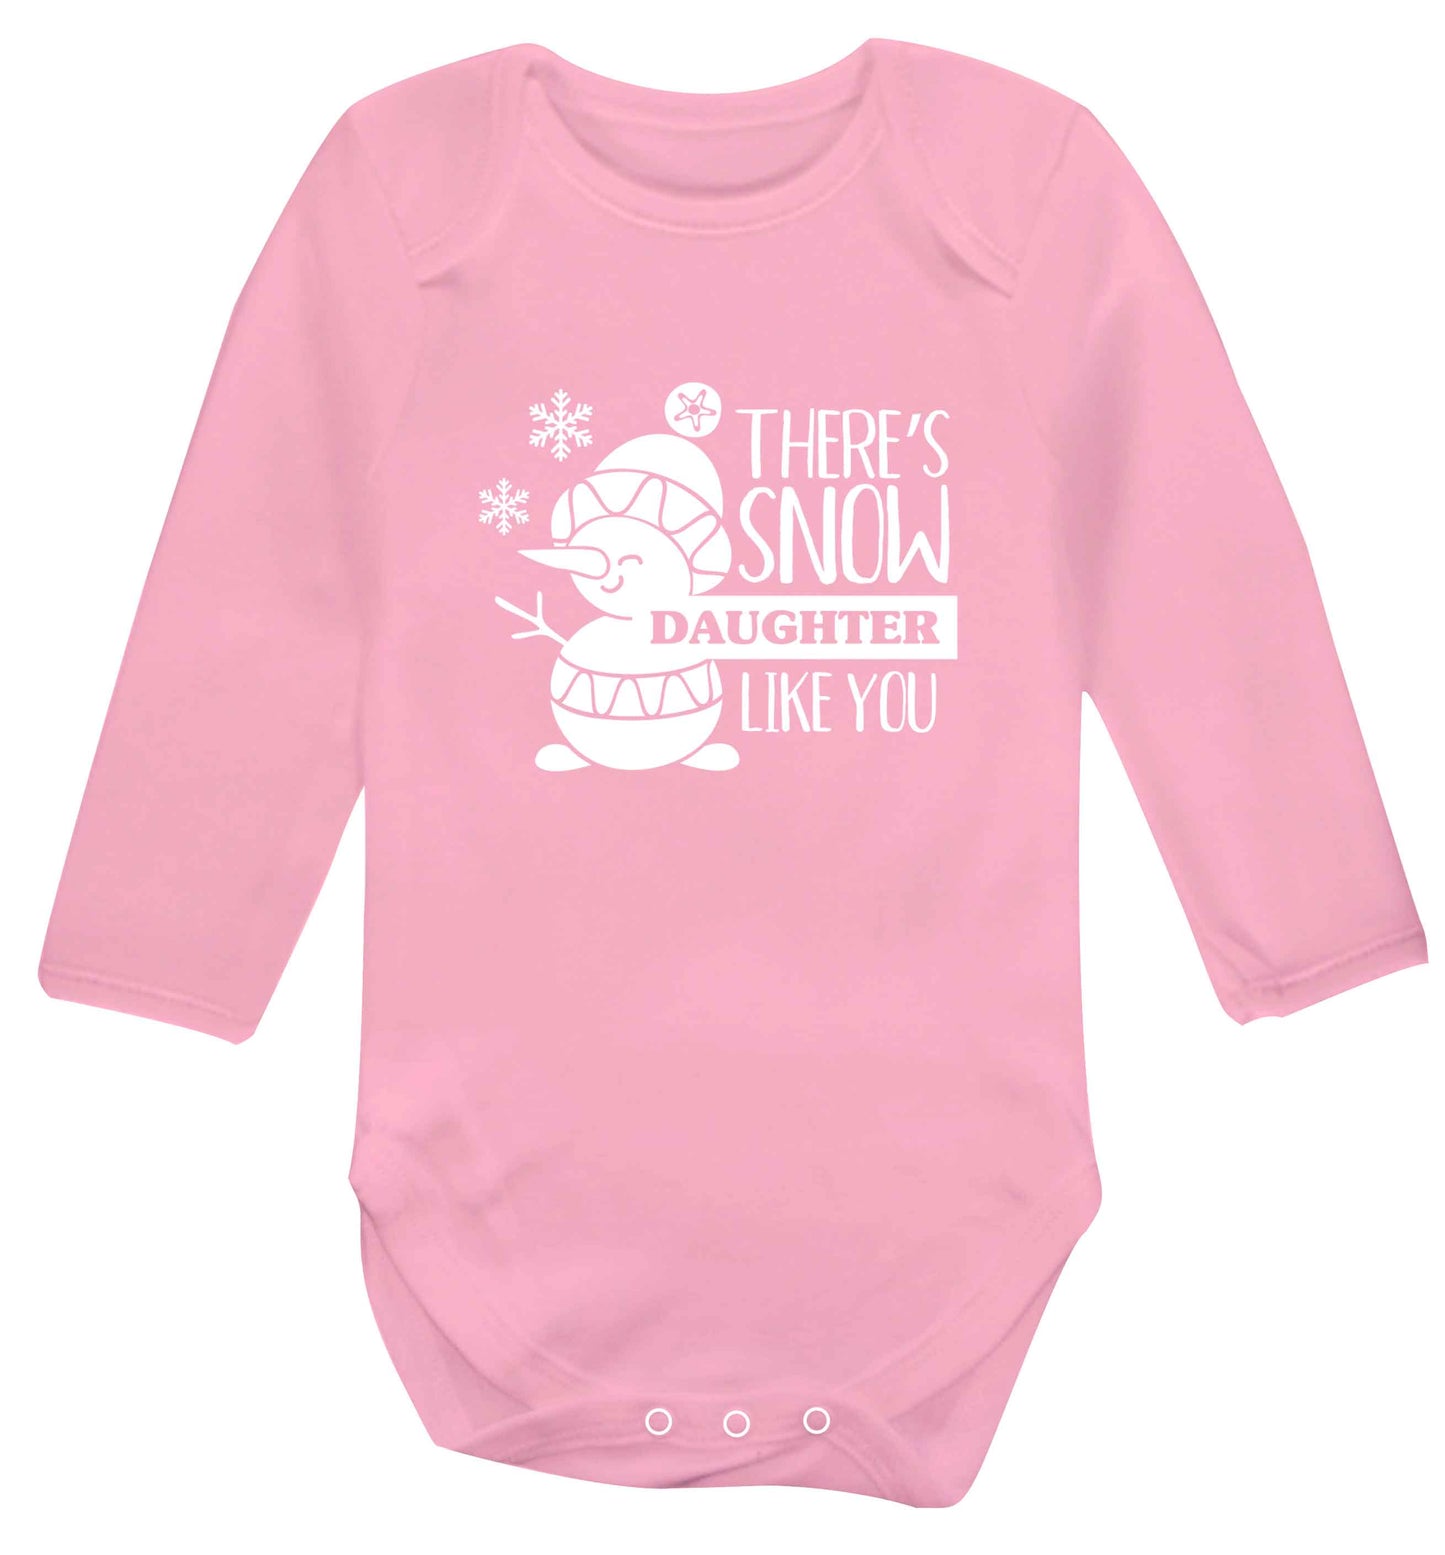 There's snow daughter like you baby vest long sleeved pale pink 6-12 months